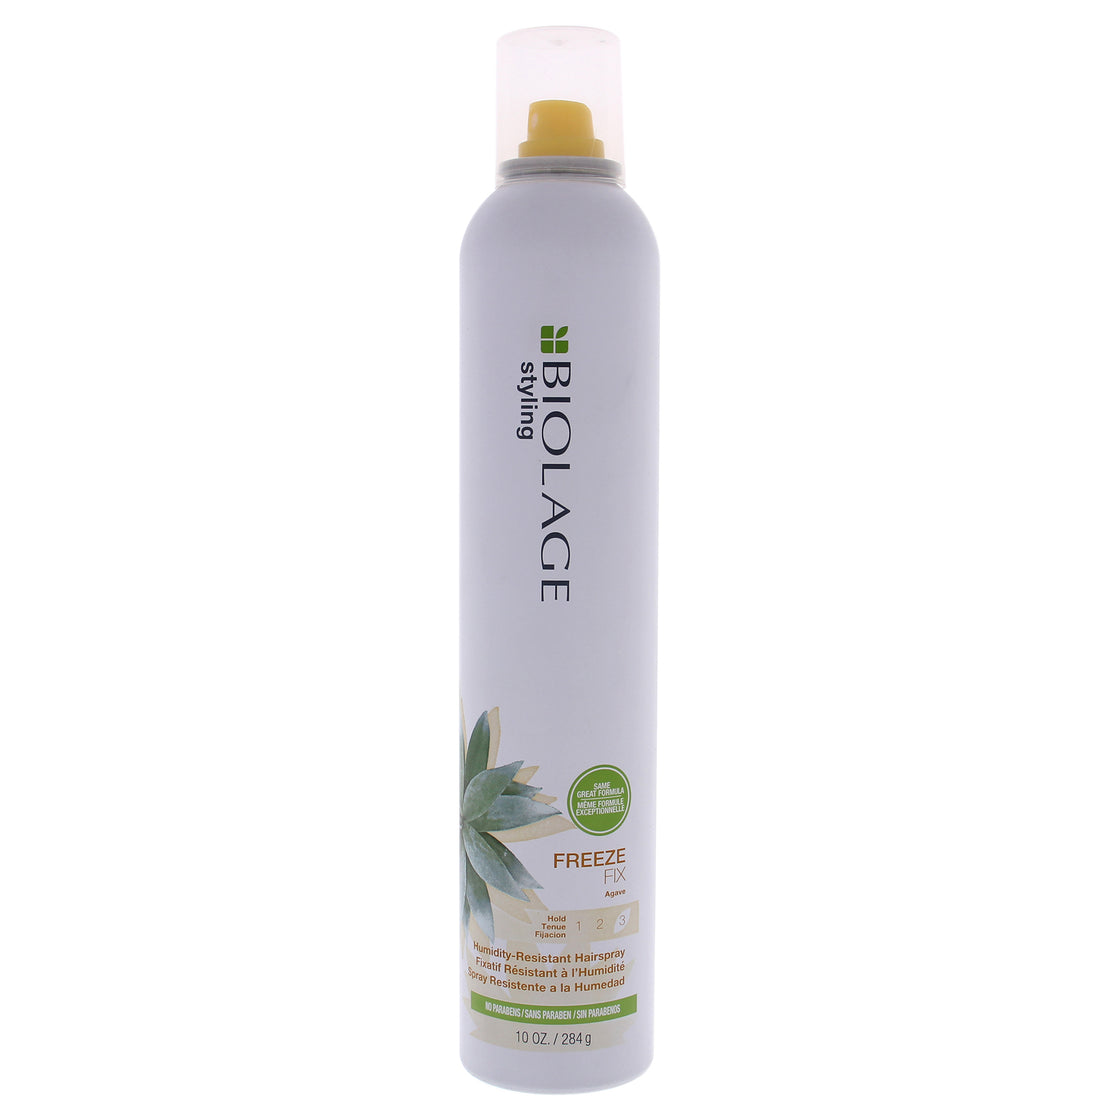 Biolage Styling Freeze Fix Humidity-Resistant Hairspray by Matrix for Unisex - 10 oz Hairspray